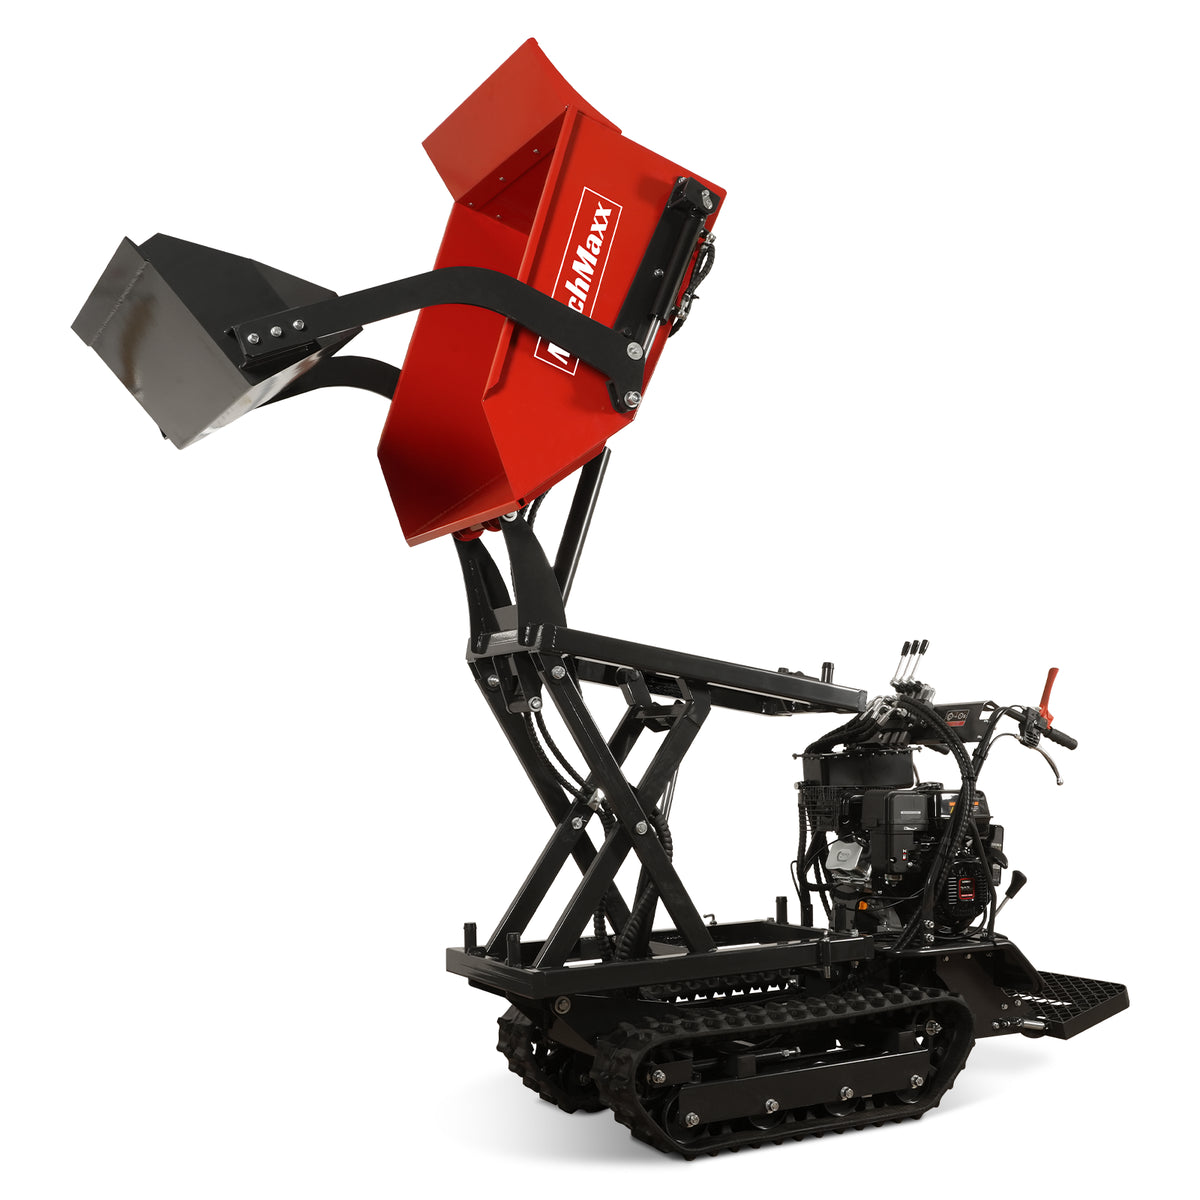 1100lbs Capacity E-Start 10HP 302cc Gas Engine Tracked Dumper Hydraulic Tipping and Lifting with Front Shovel